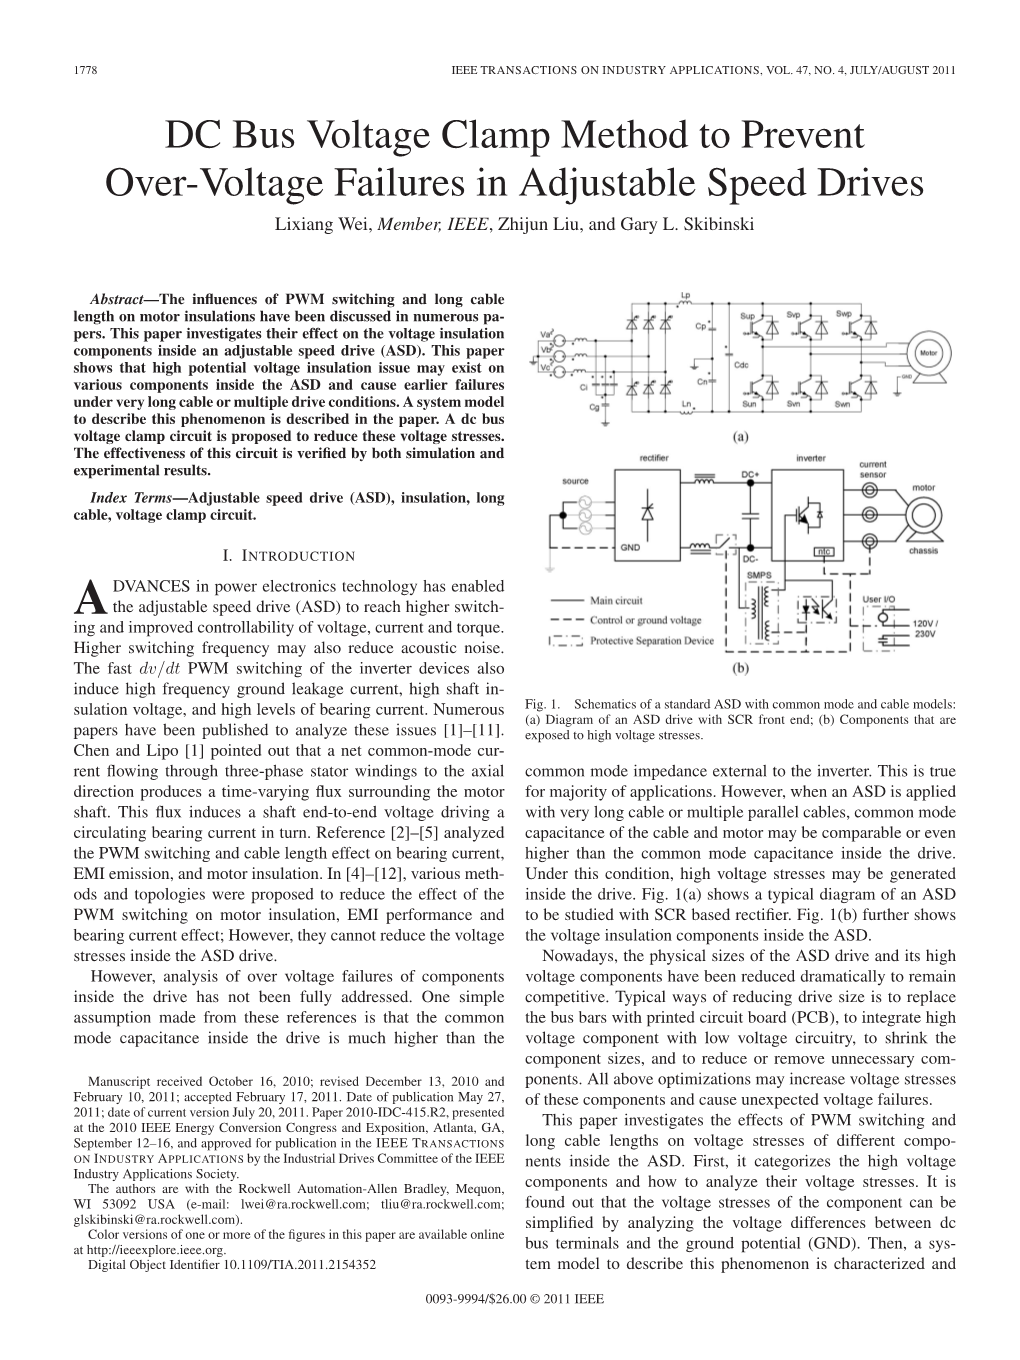 DC Bus Voltage Clamp Method to Prevent Over-Voltage Failures in Adjustable Speed Drives Lixiang Wei, Member, IEEE, Zhijun Liu, and Gary L